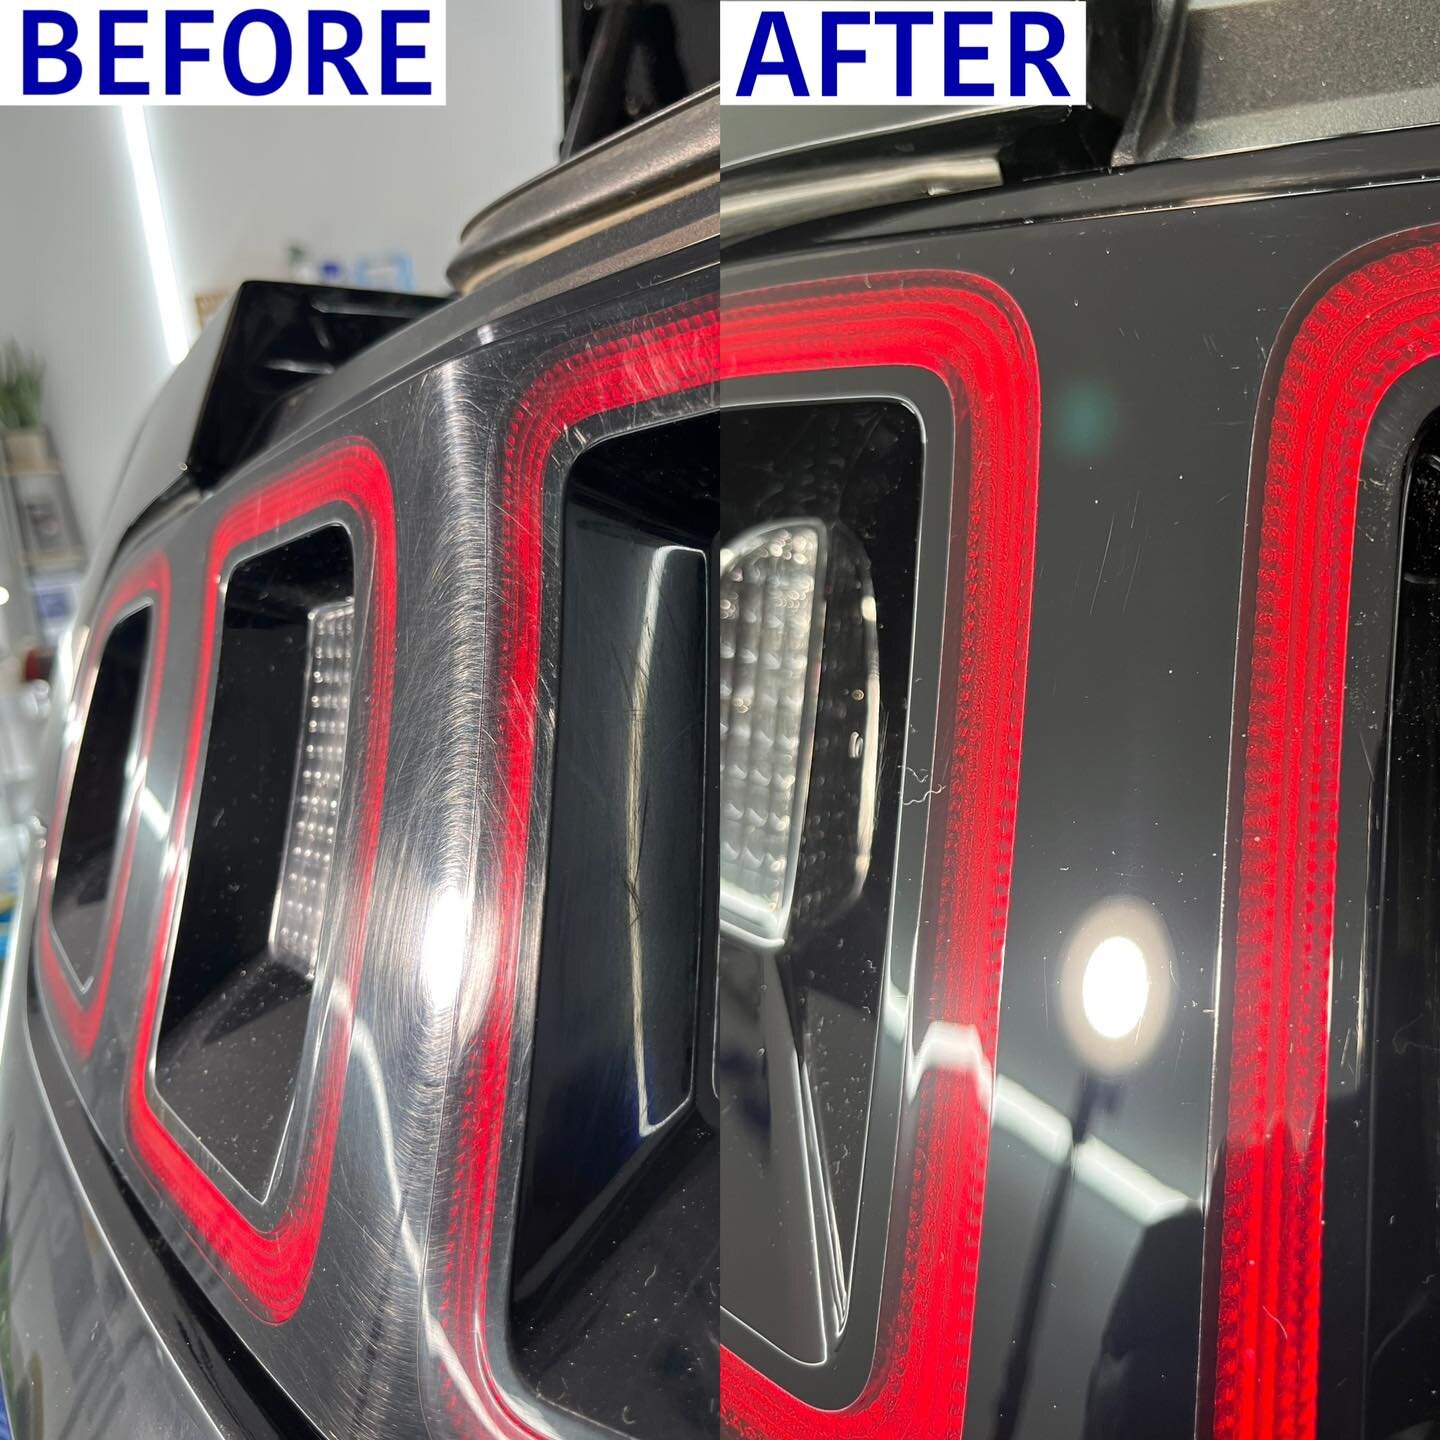 This 2014 Ford Mustang GT received a paint decontamination, a level 2 paint correction, and an application of our professional grade ceramic coating
&bull;
&bull;
&bull;

📞 716-602-6817
✉️ immaculate716@gmail.com
🌐 www.immaculatedetailing716.com